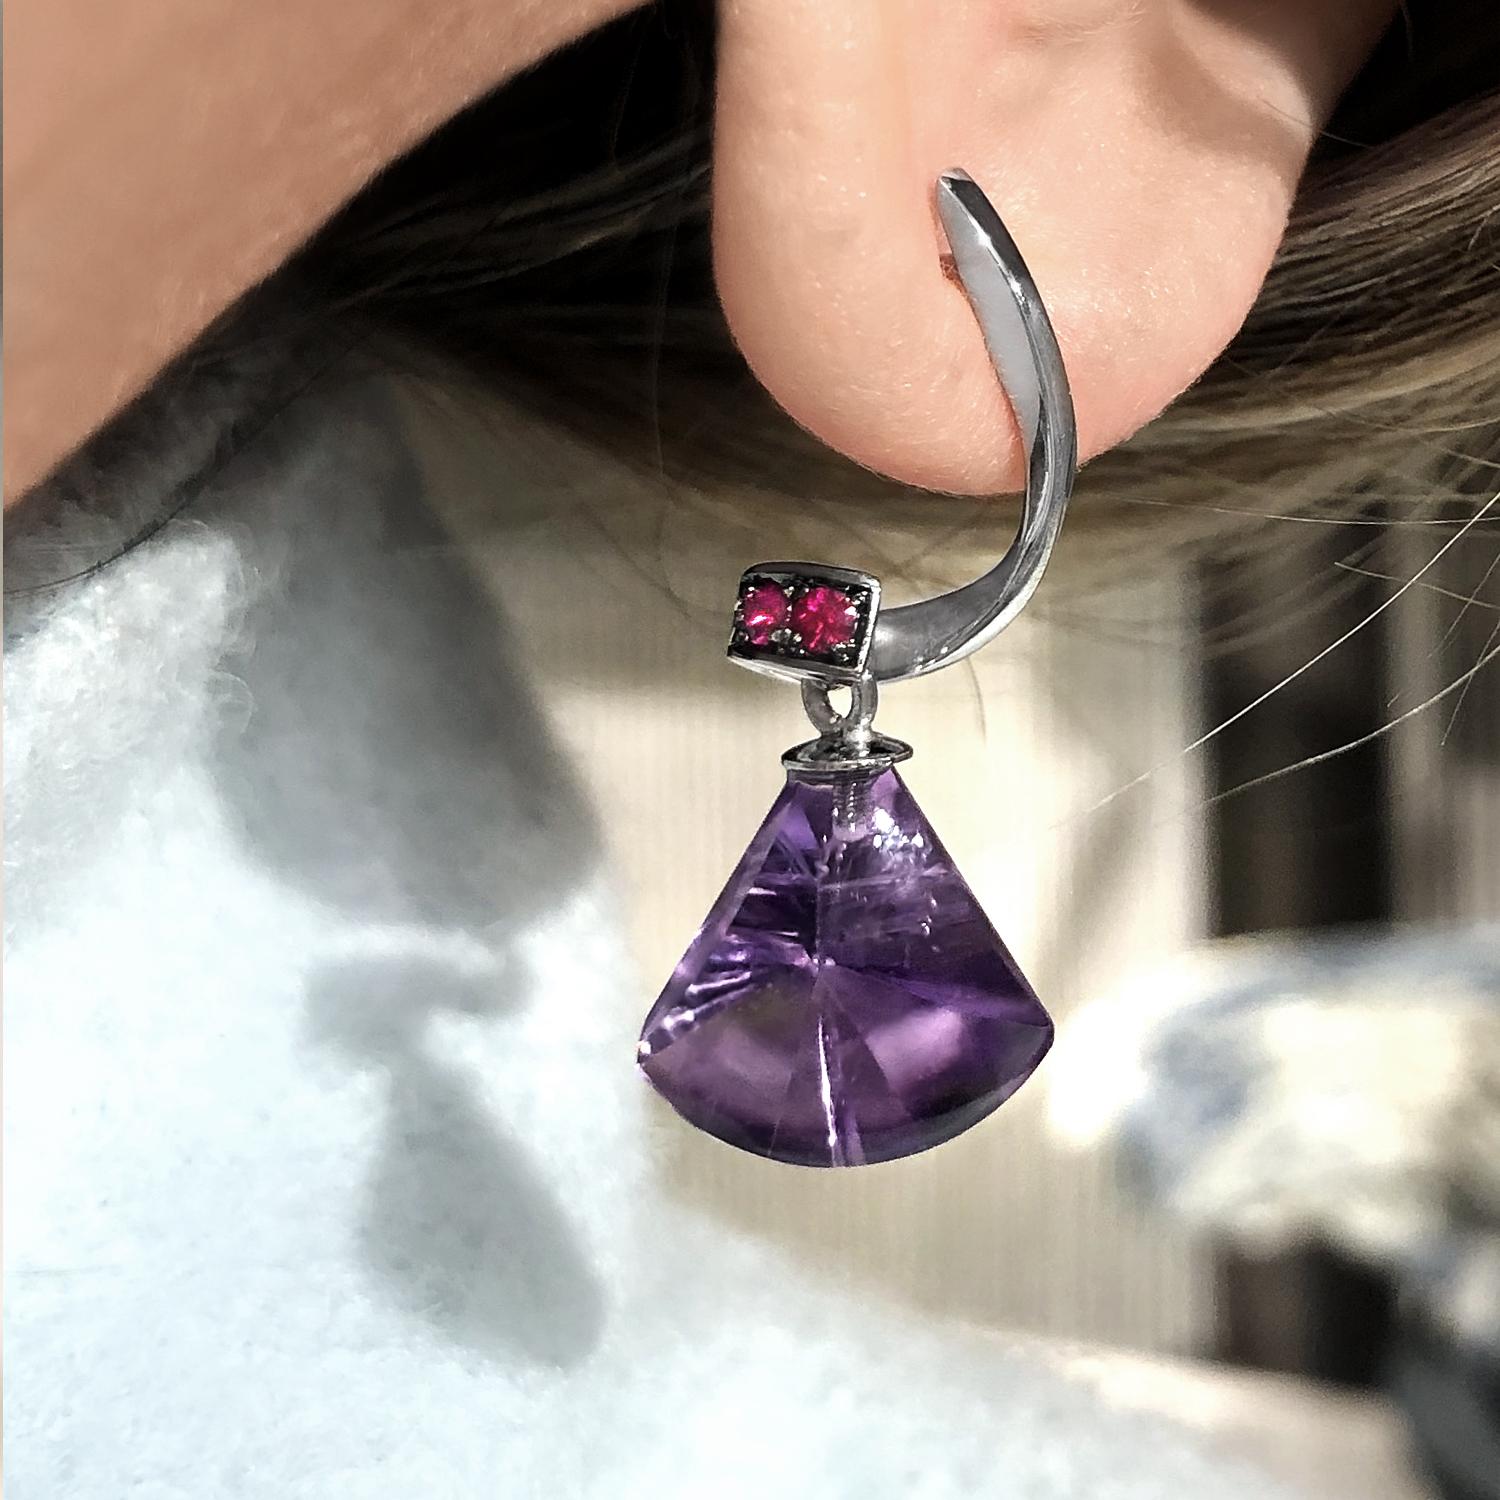 Spiral Drop Earrings handmade in Belgium by jewelry artist Joke Quick in 18k white gold featuring 9.07 total carats of custom-cut amethyst accented by four rubies totaling 0.13 carats. 

About the Maker - Joke Quick developed a fascination for fine